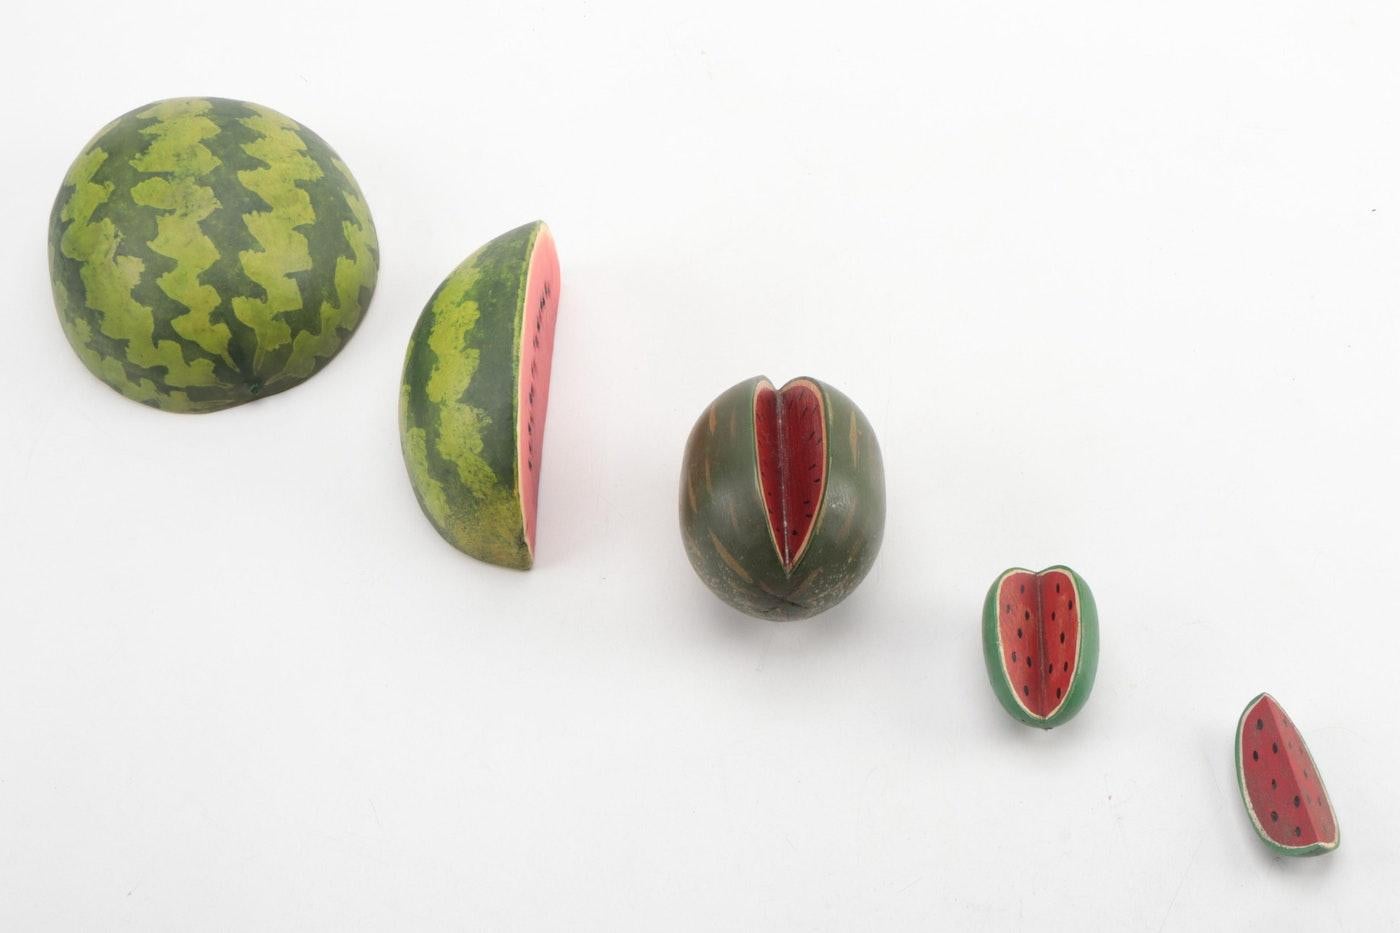 Vintage Watermelon Hand Carved Sculpture Set, Decoy Decor, Trompe L’Oeil In Good Condition For Sale In Brooklyn, NY